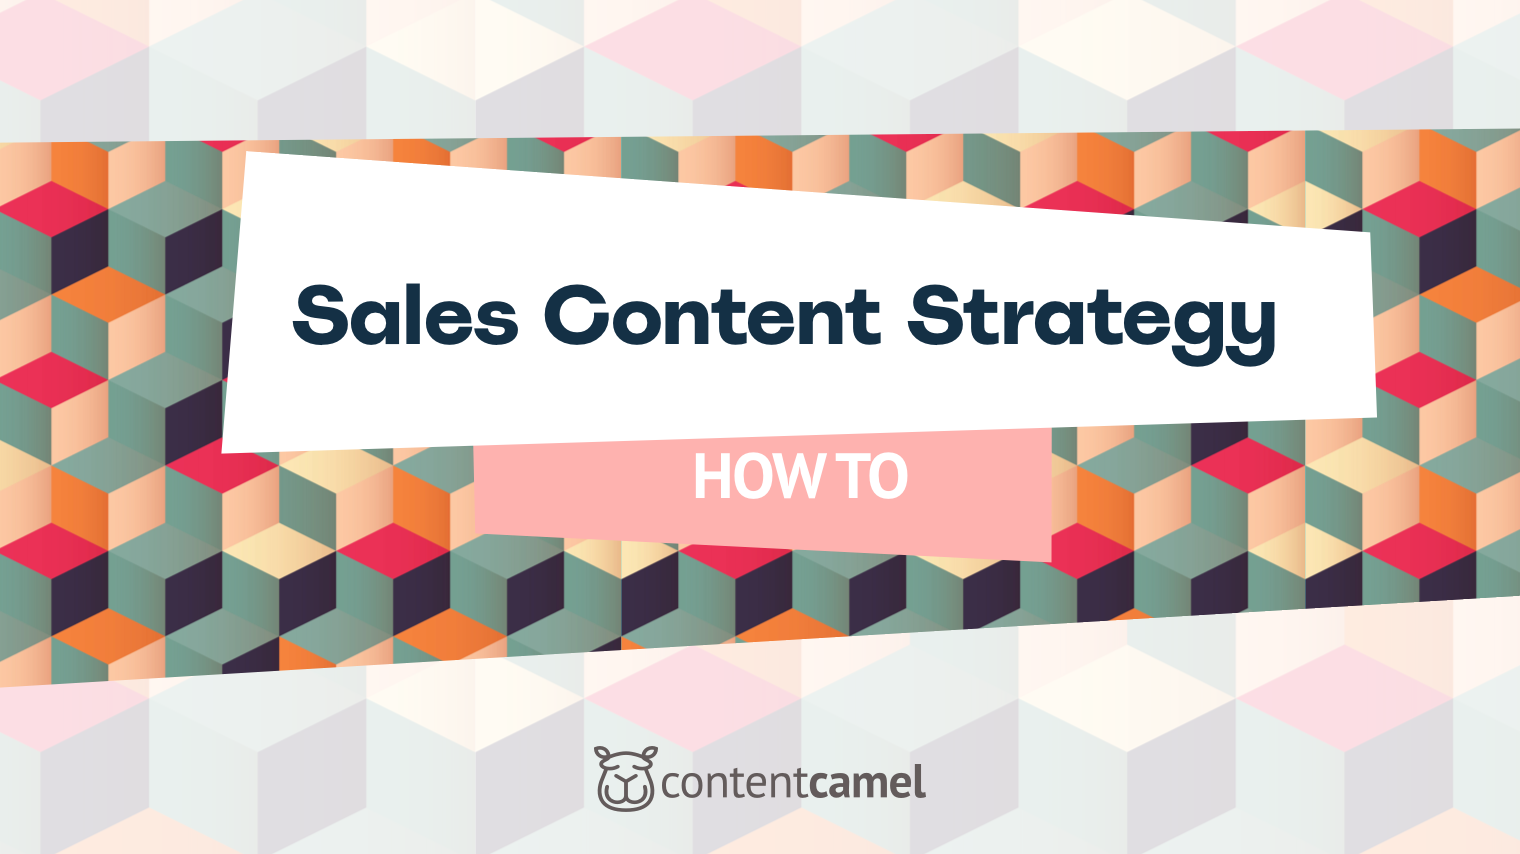 How to Develop a Sales Content Strategy